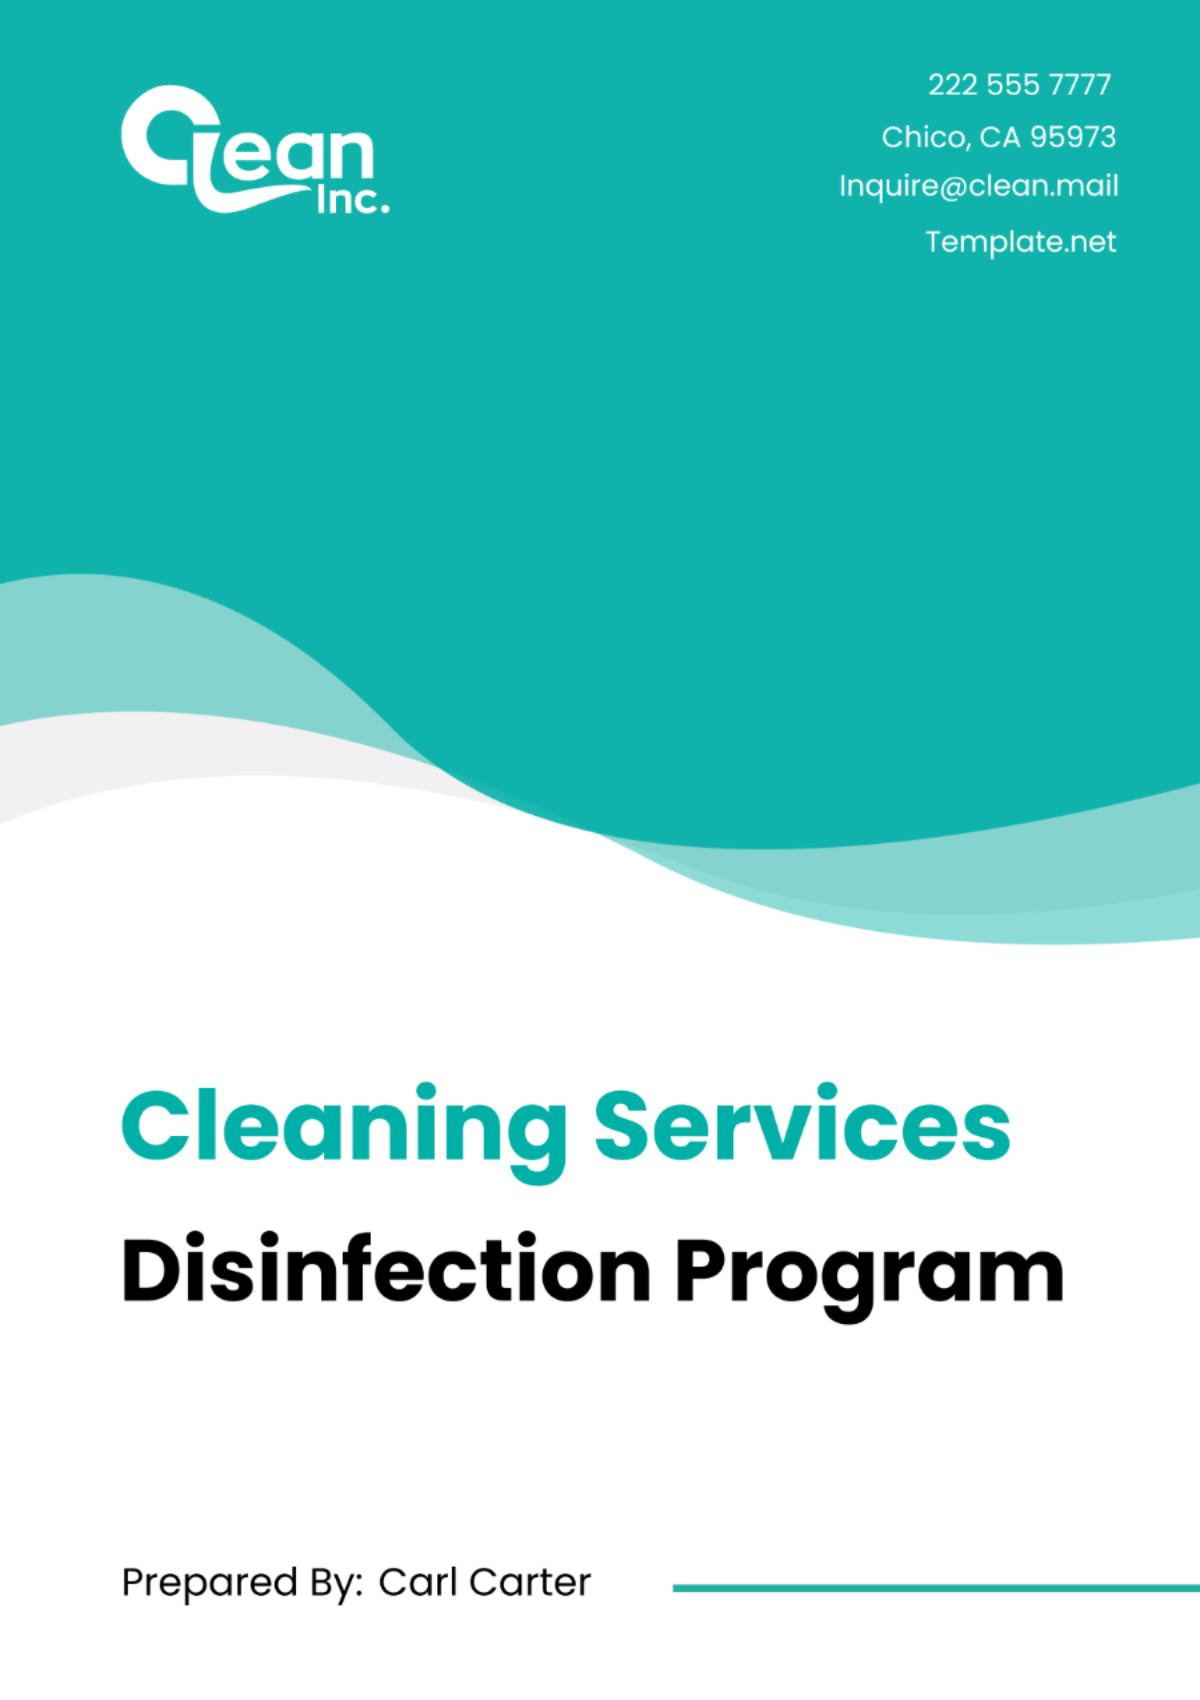 Cleaning Services Disinfection Program Template